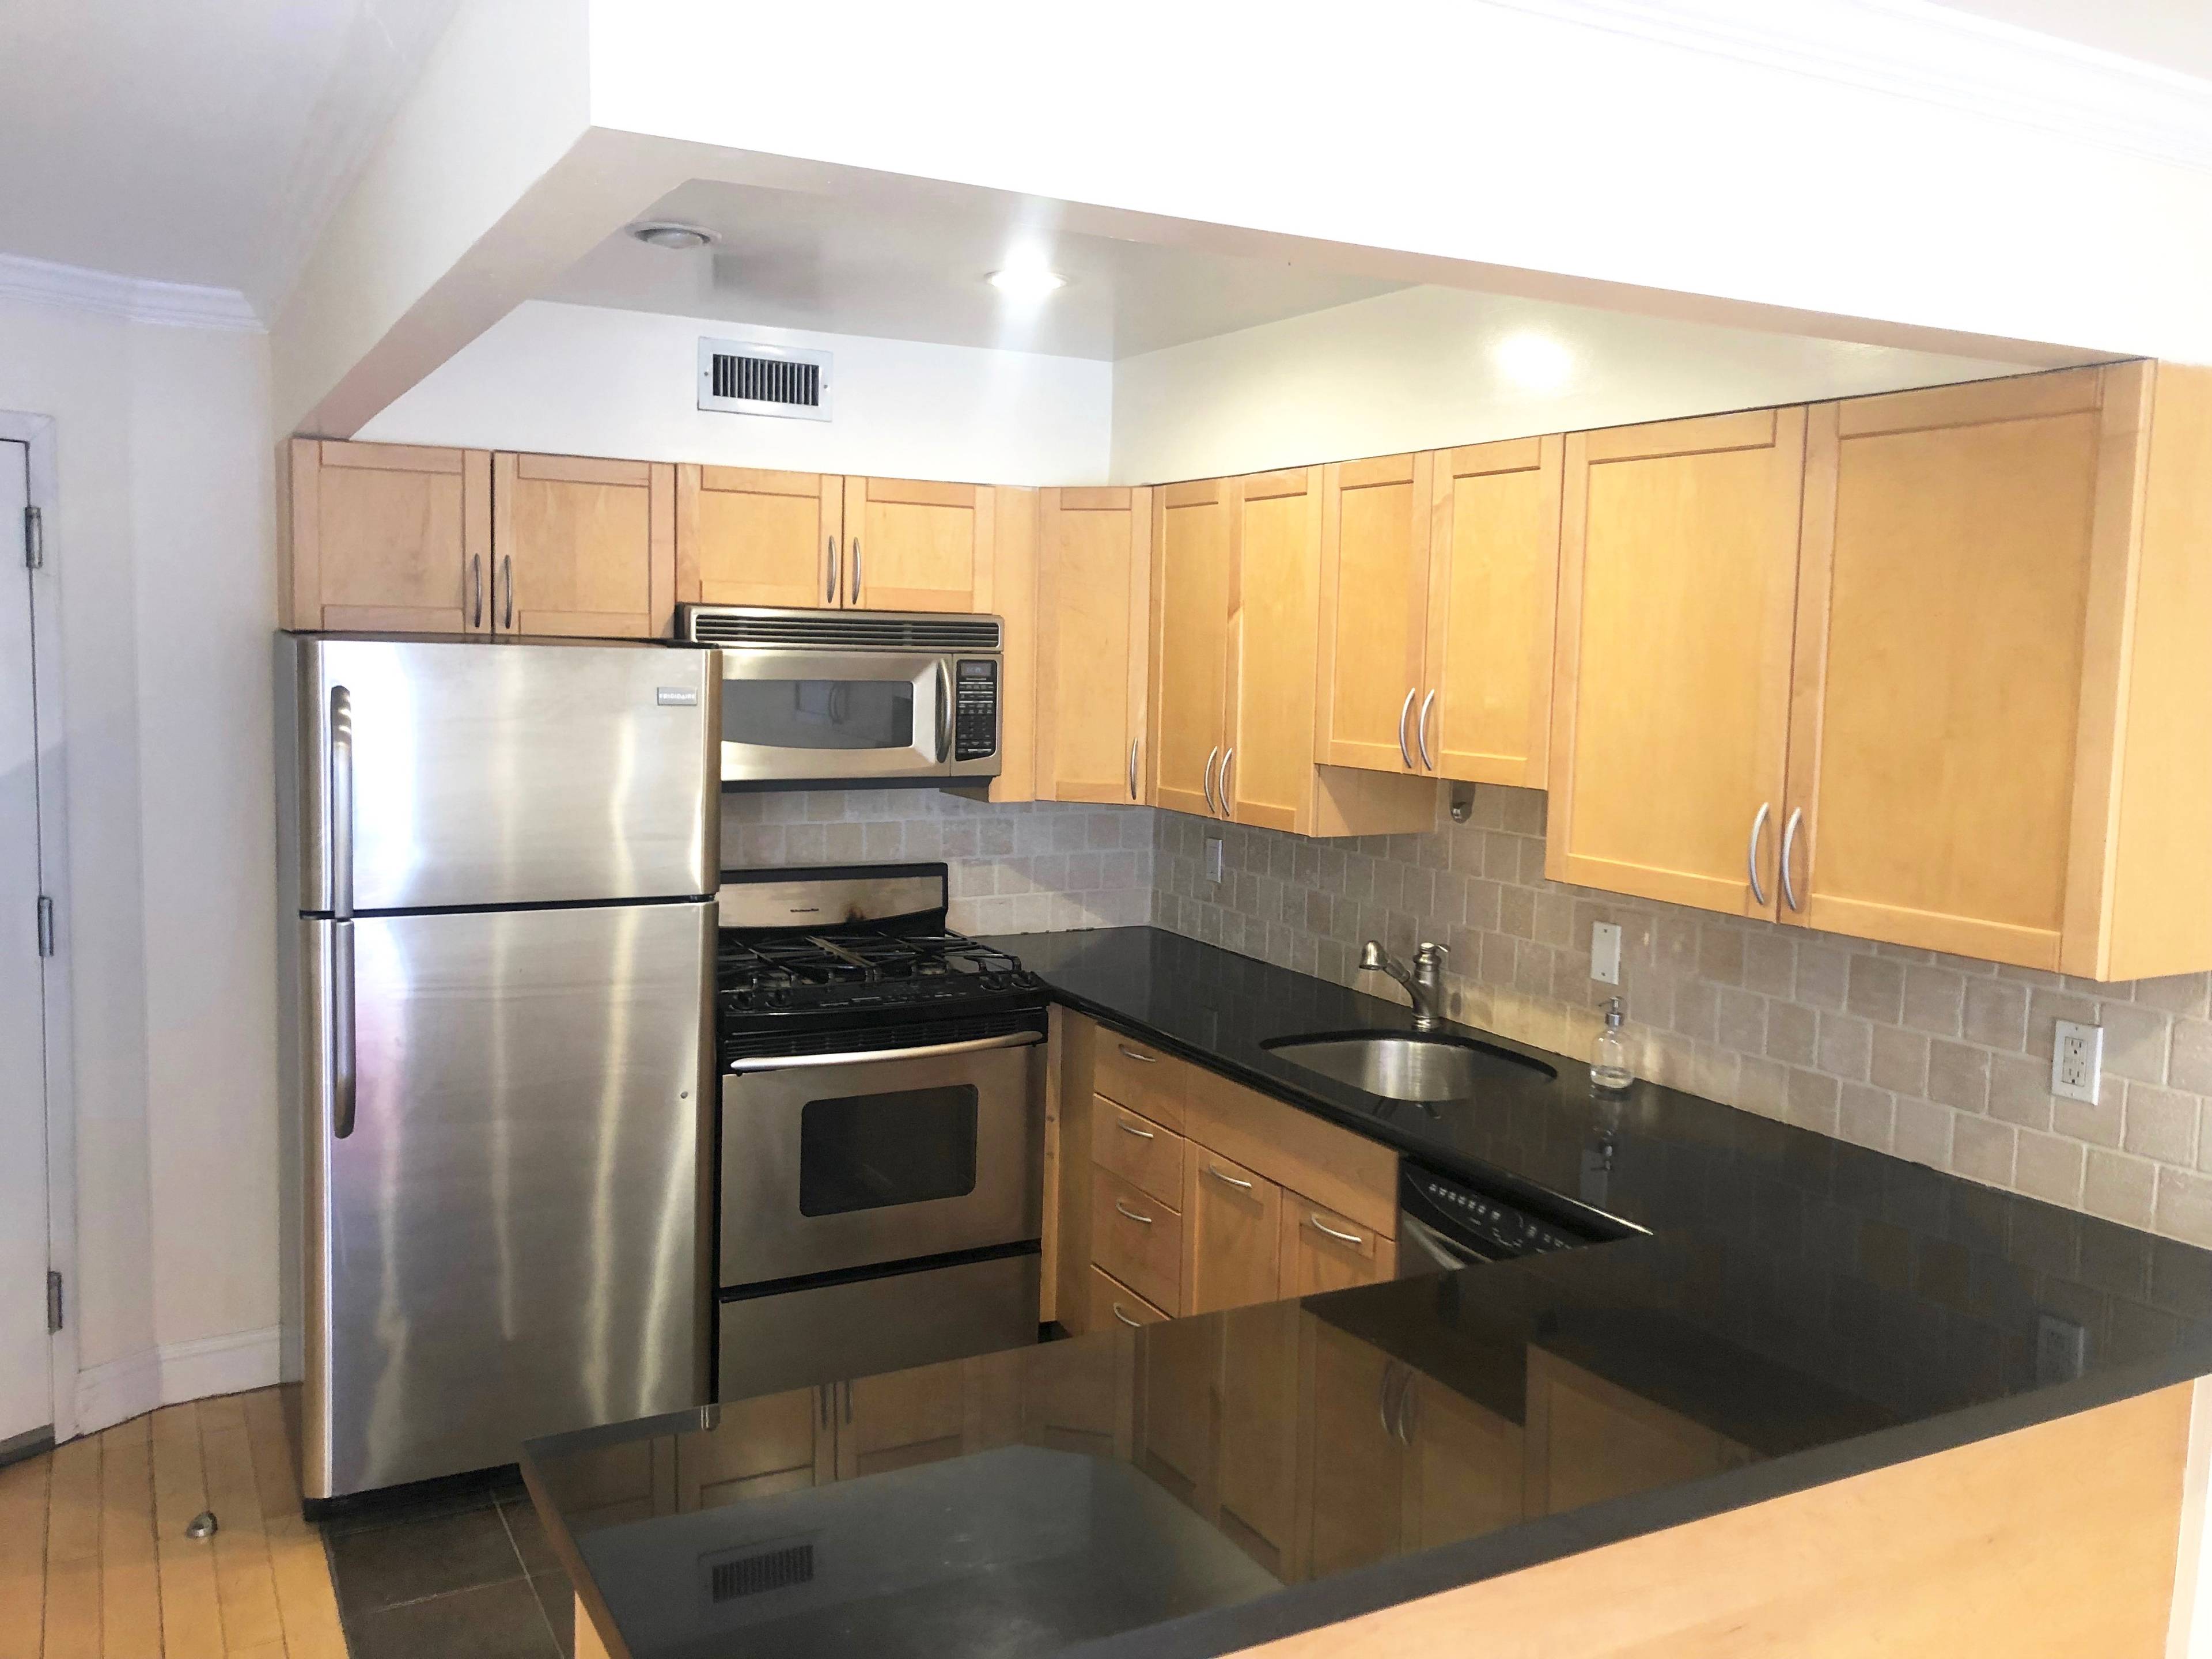 143 Mulberry St Immediate move in Highlights of the apartment Elevator Building 4th floor Back facing apartment Balcony Windows in every room This one bedroom apartment features condo style renovations ...